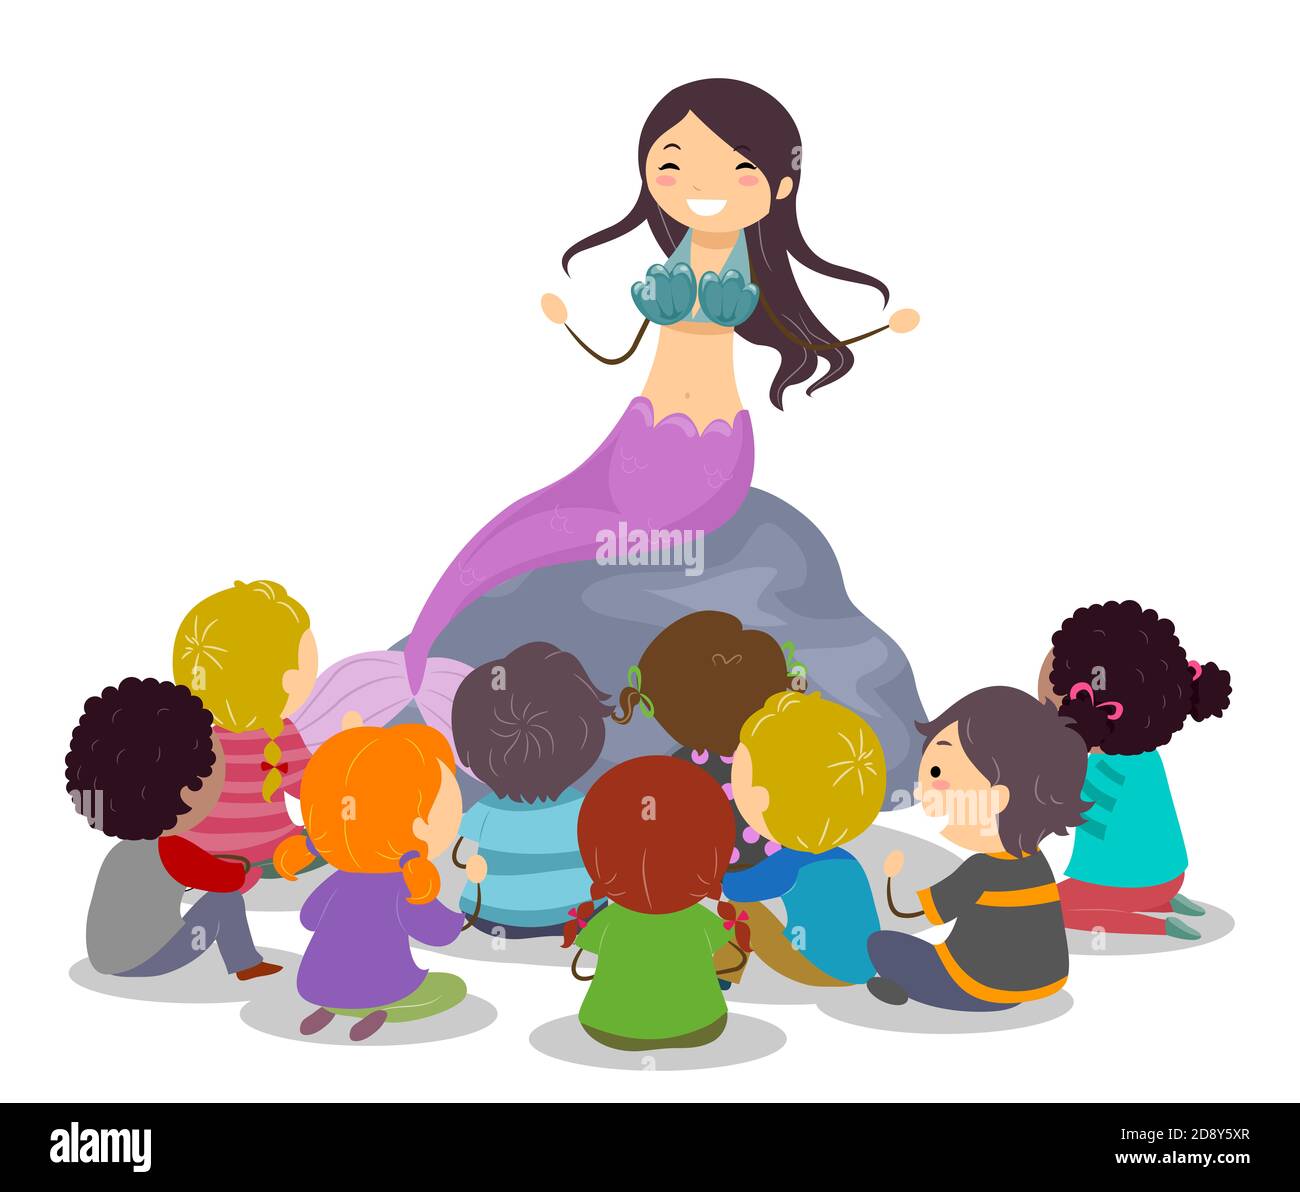 Illustration of Stickman Kids Listening to a Girl Mermaid Telling Story Stock Photo